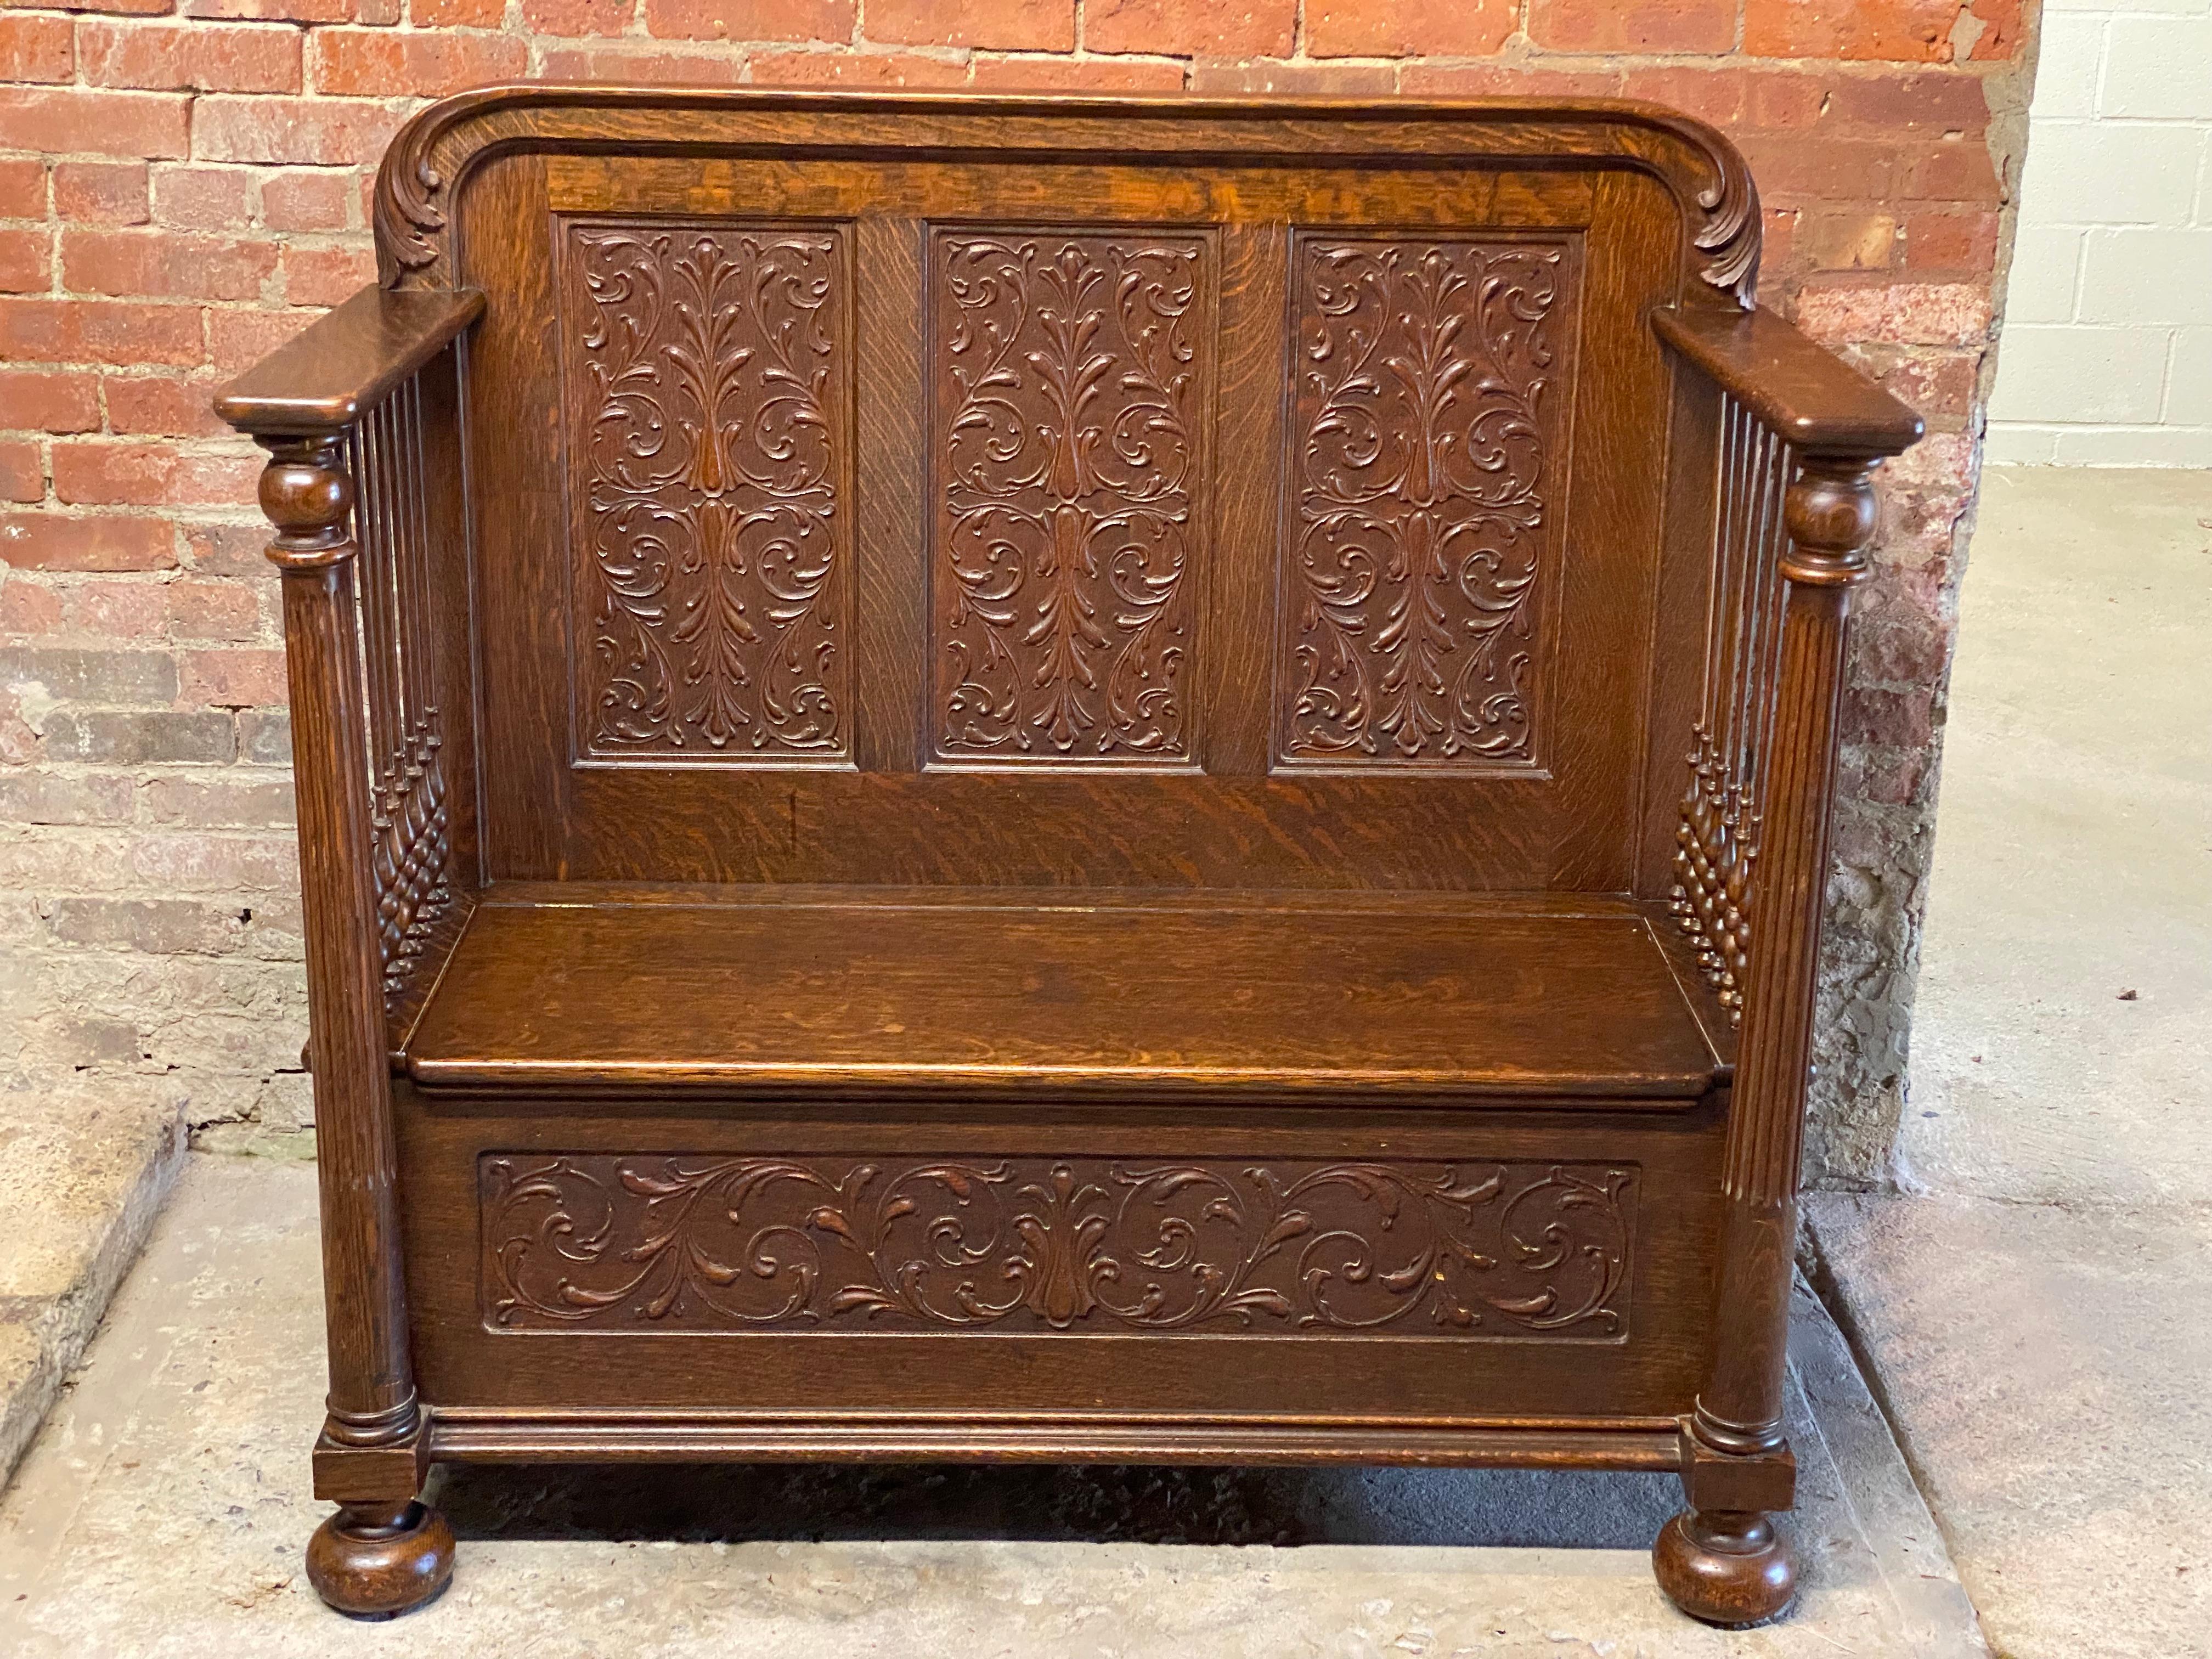 American High Victorian Carved Quarter Sawn Oak Deacon's Bench